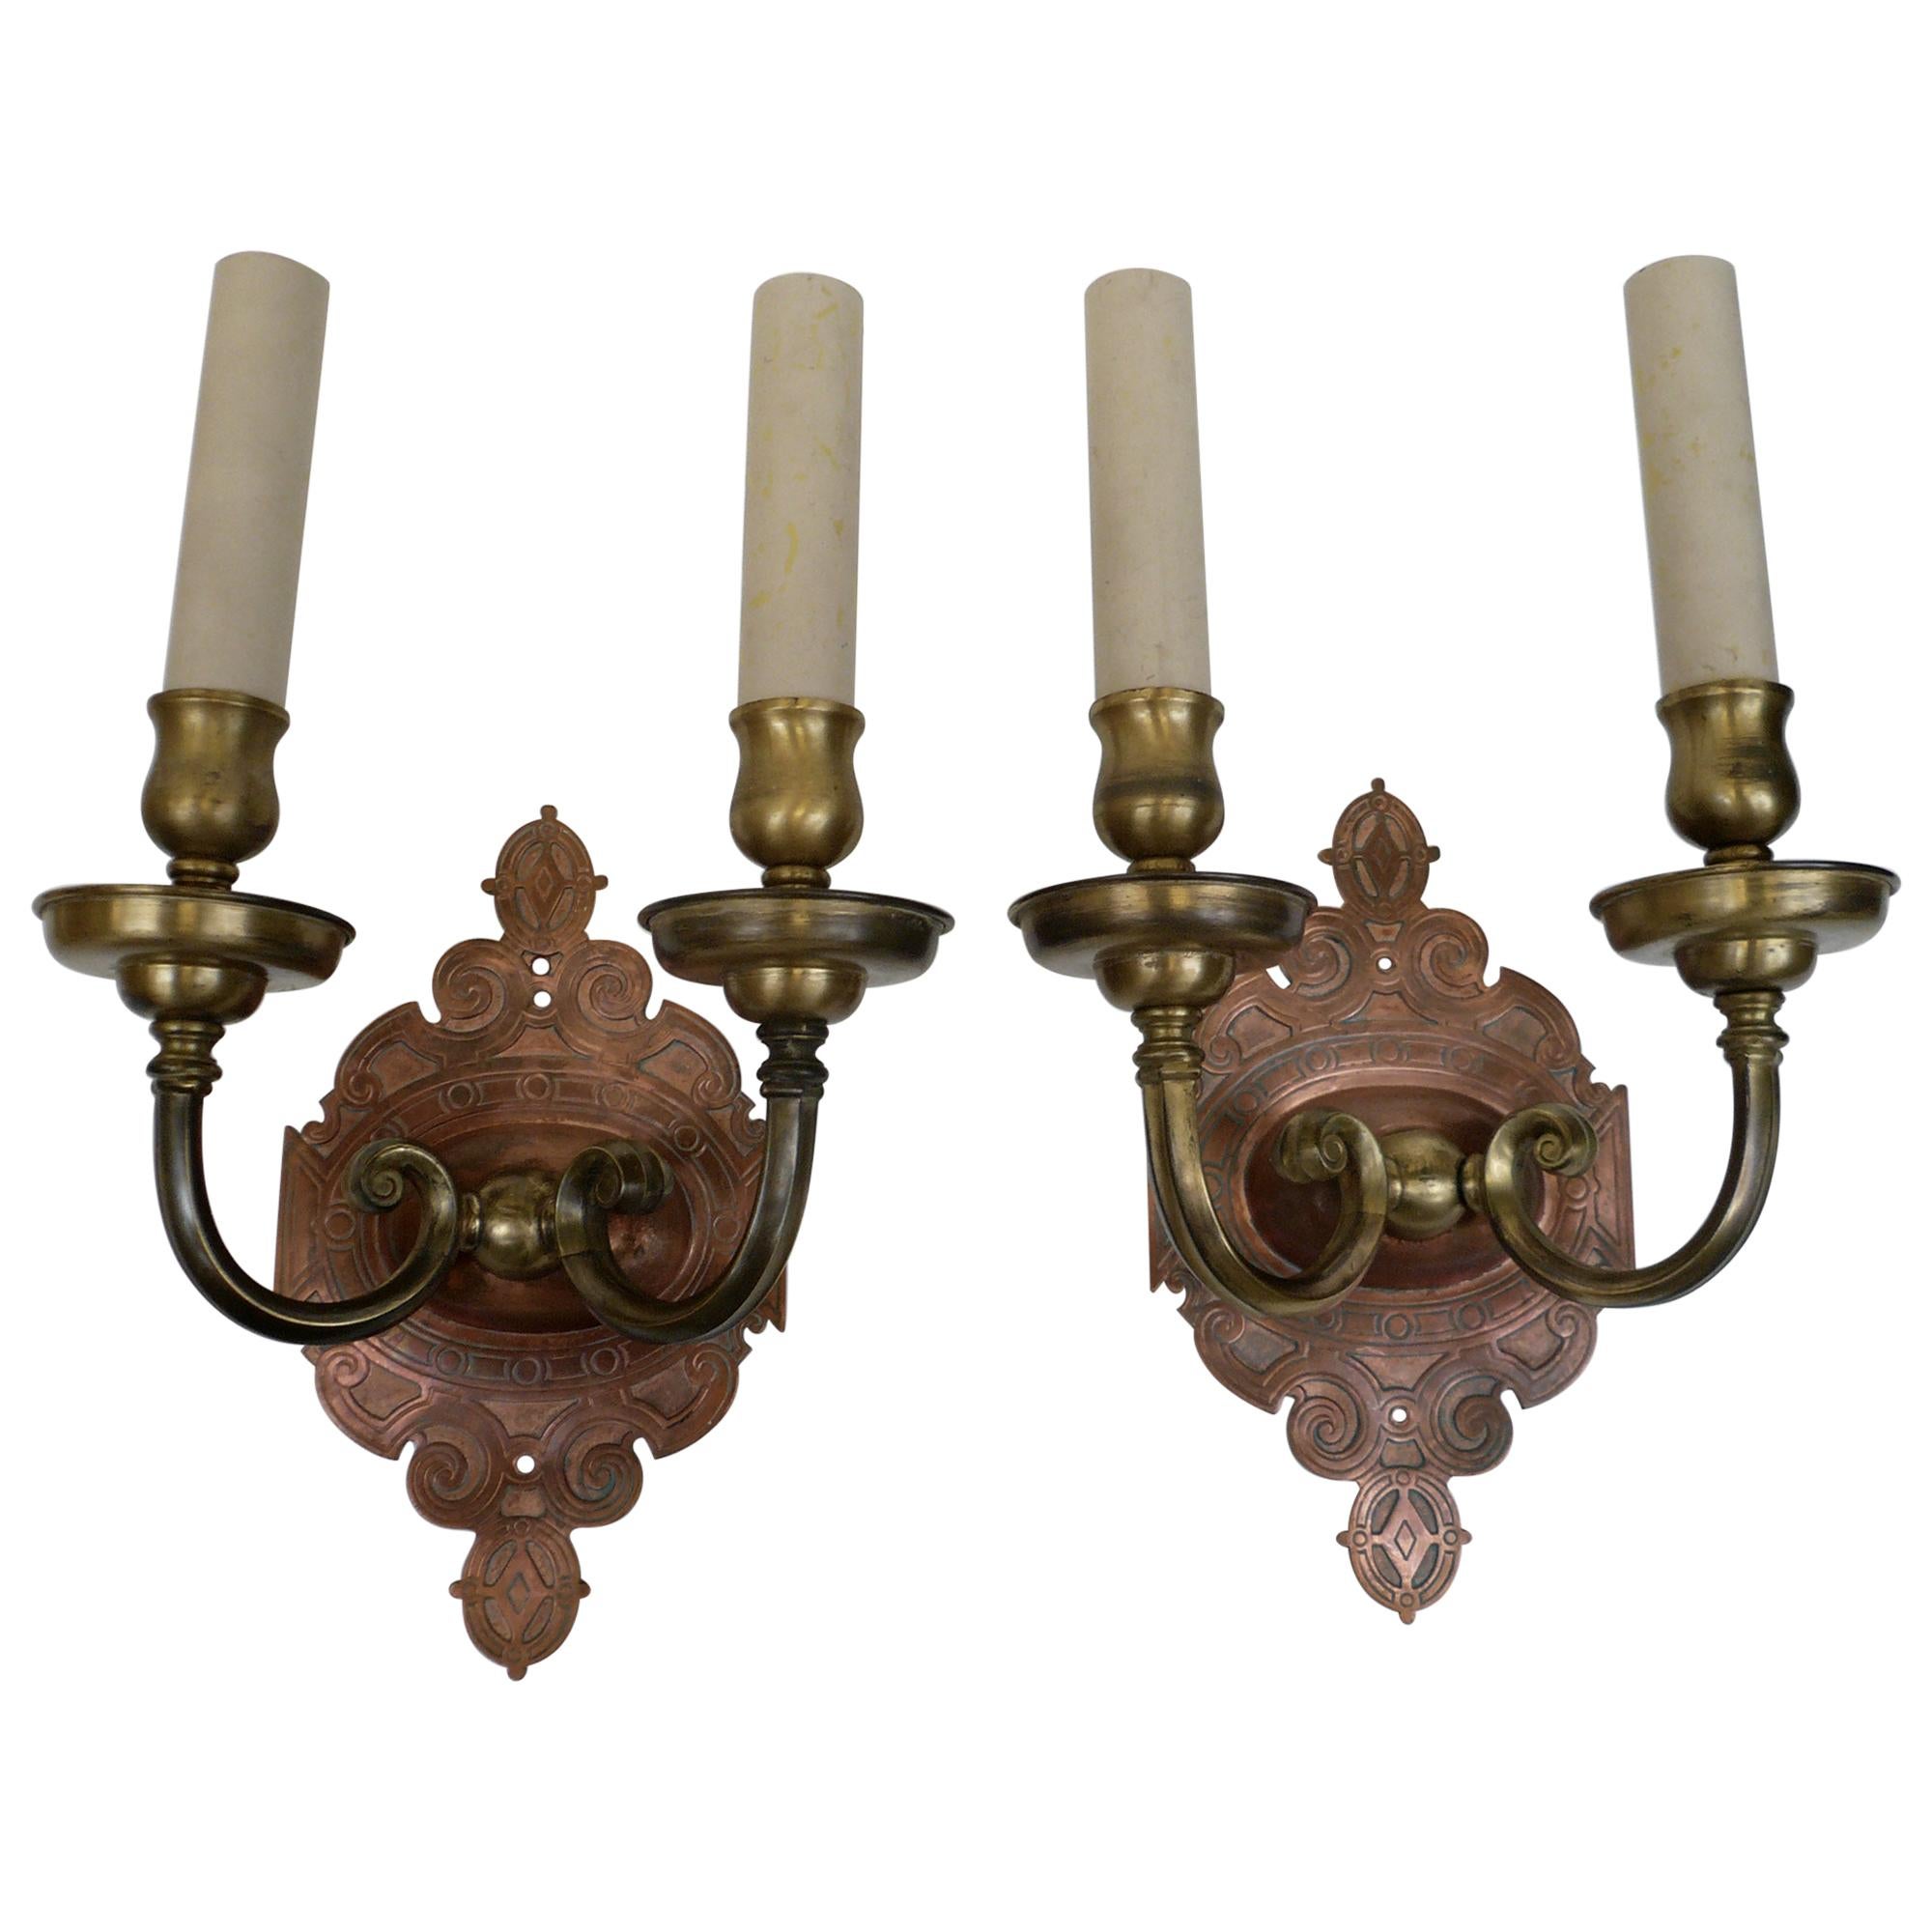 Pair of Signed Caldwell Arts & Crafts Mixed Metal Sconces